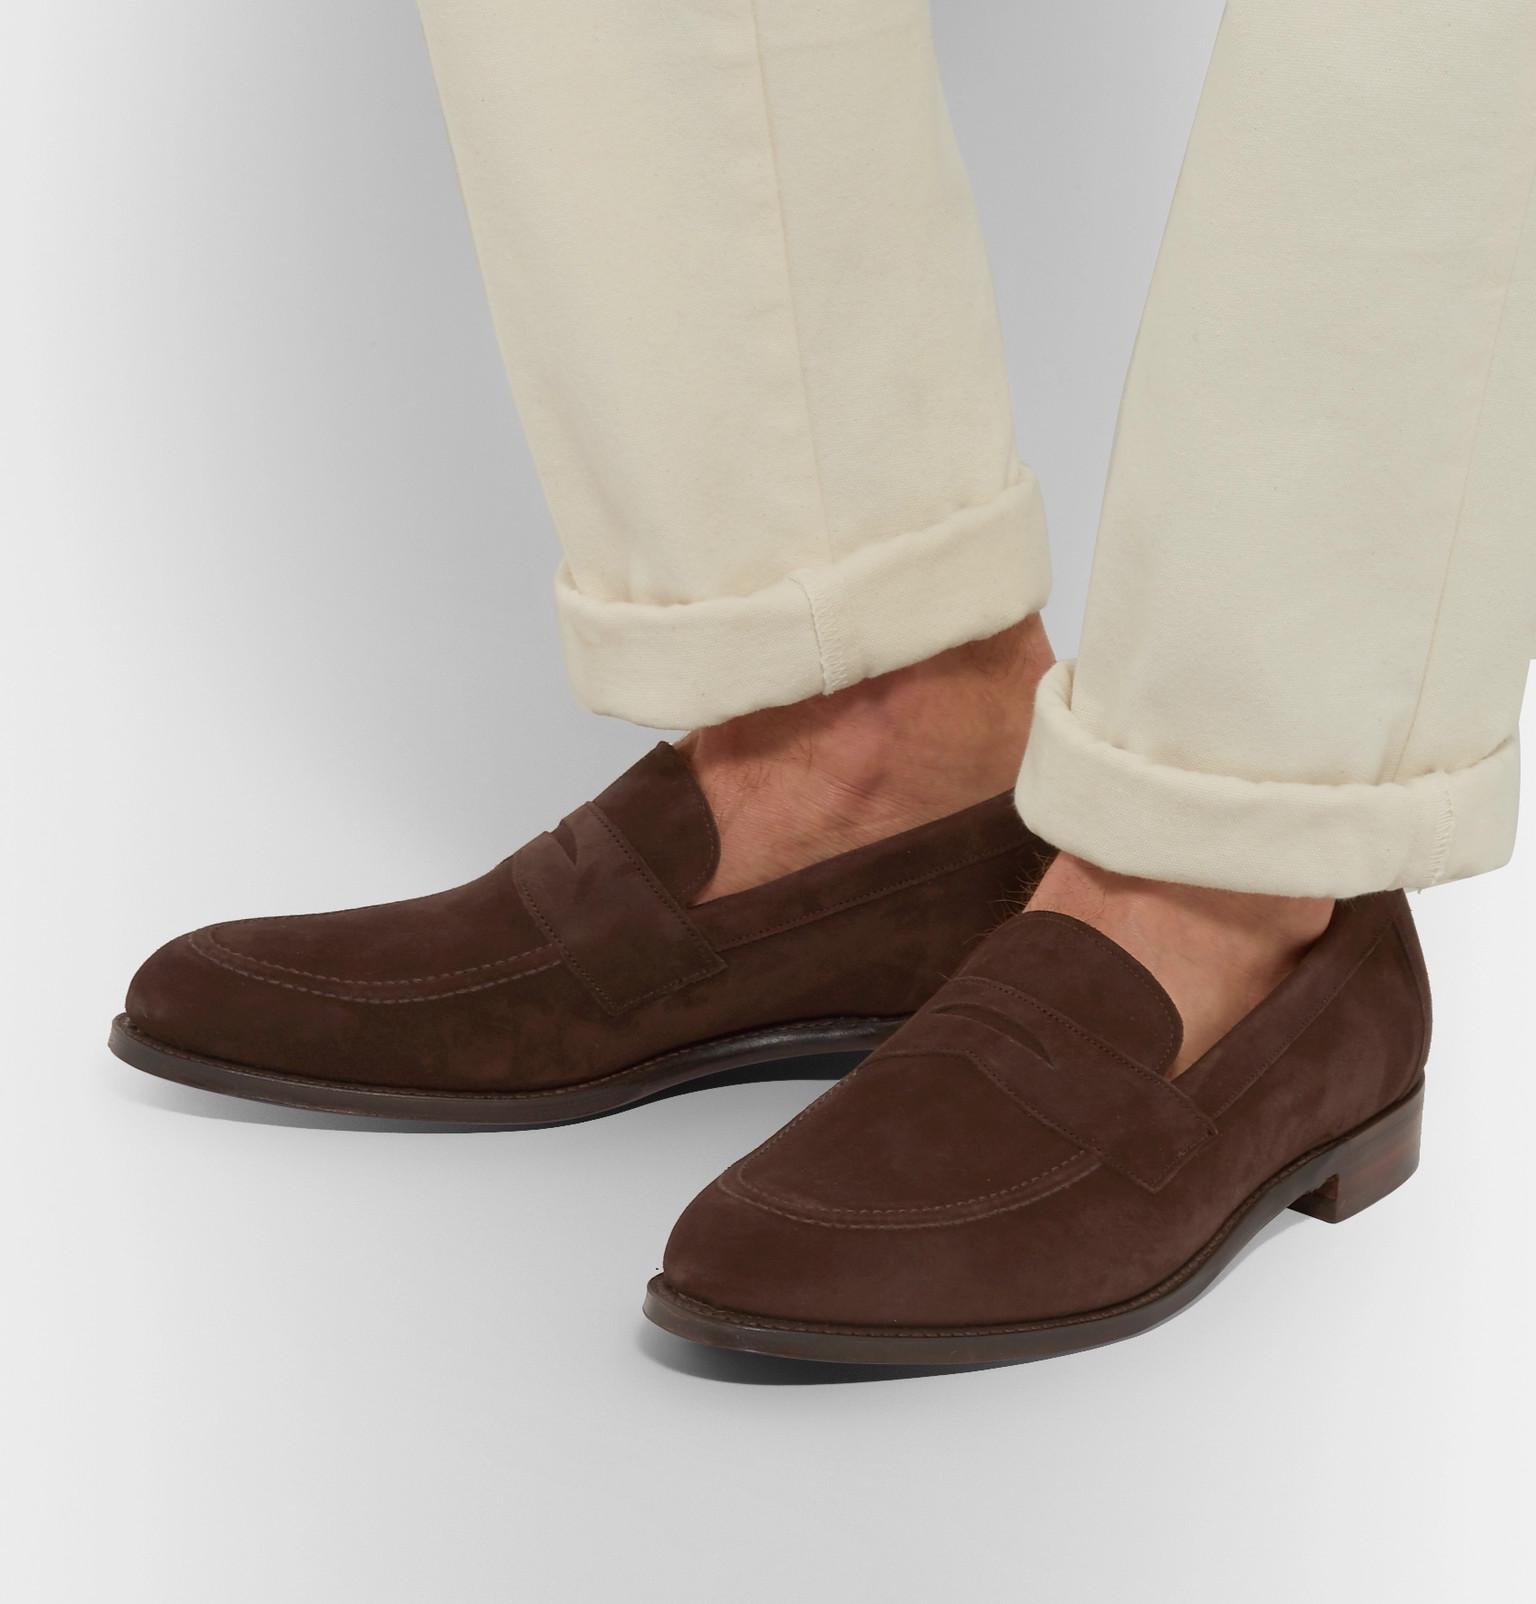 cheaney suede loafers